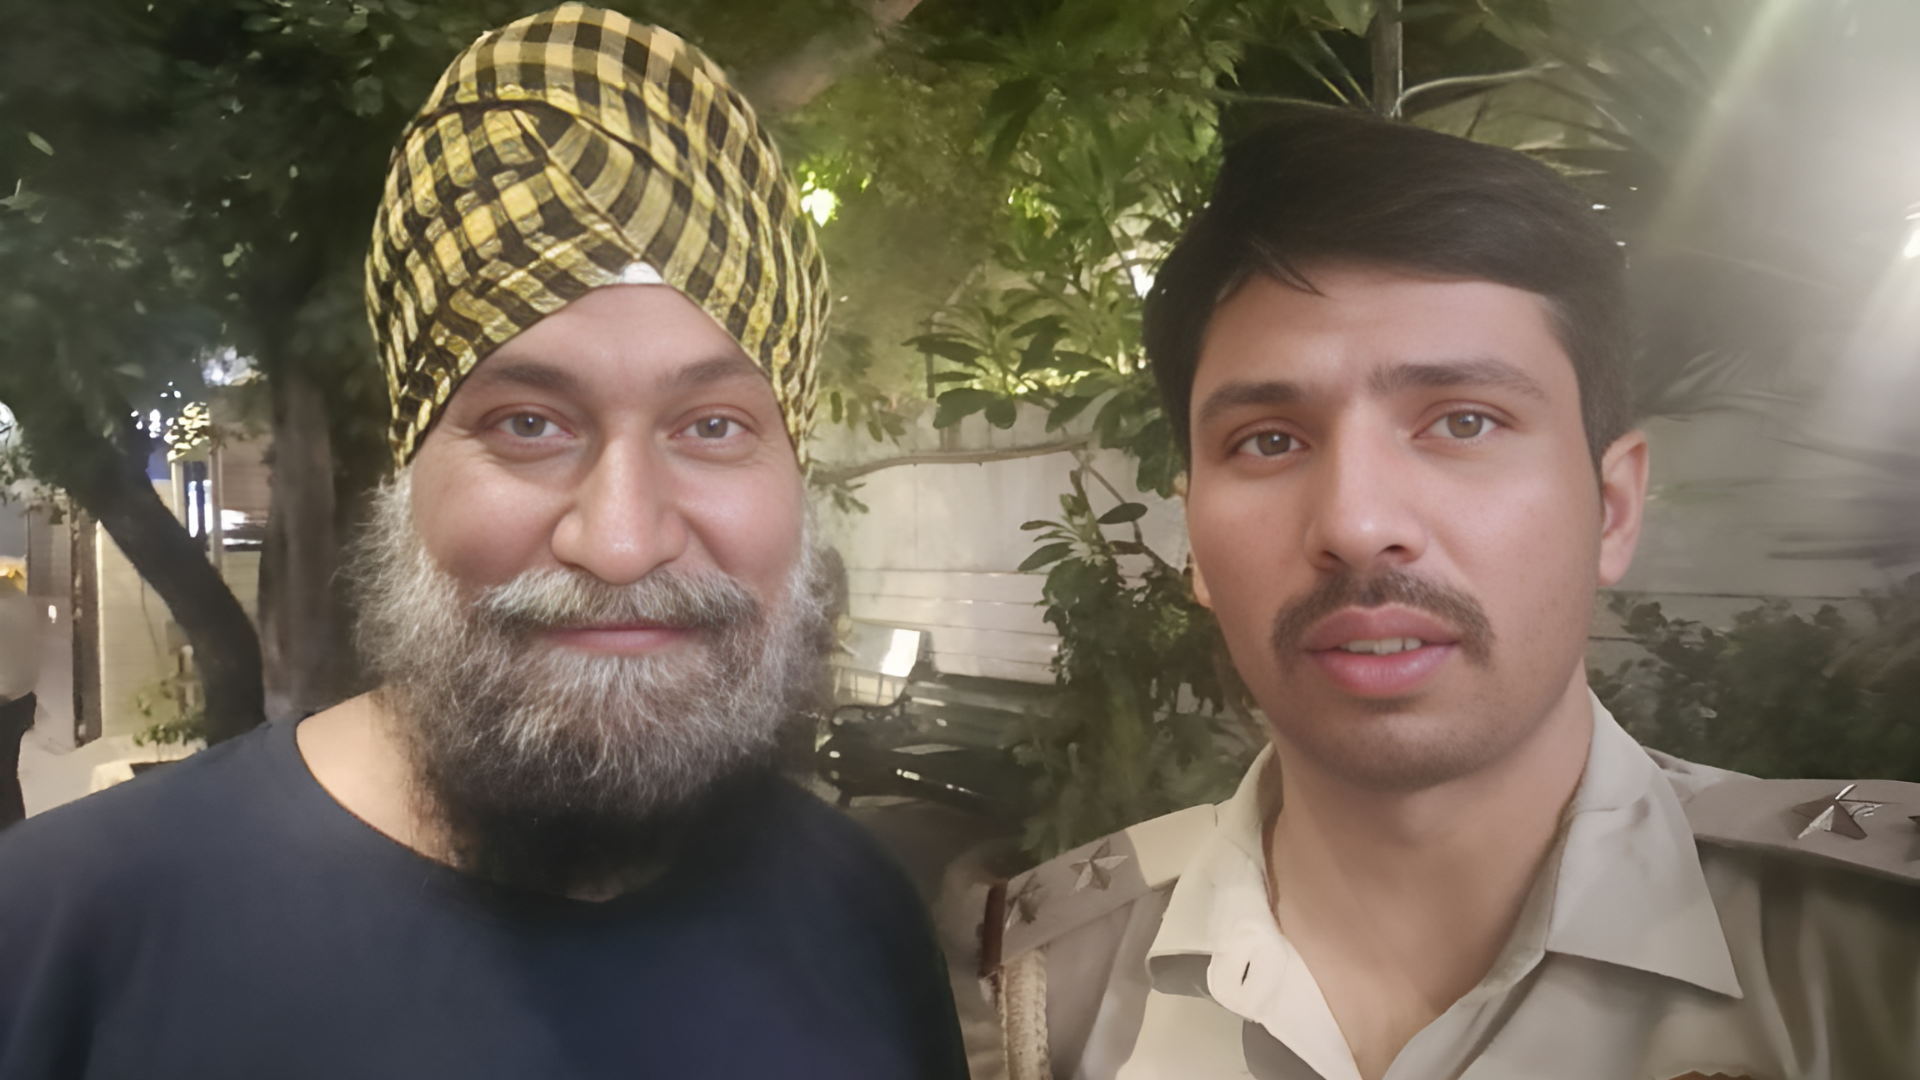 Taarak Mehta’s Gurucharan Singh Found After 28-Day Absence, Pictured with Police Officer